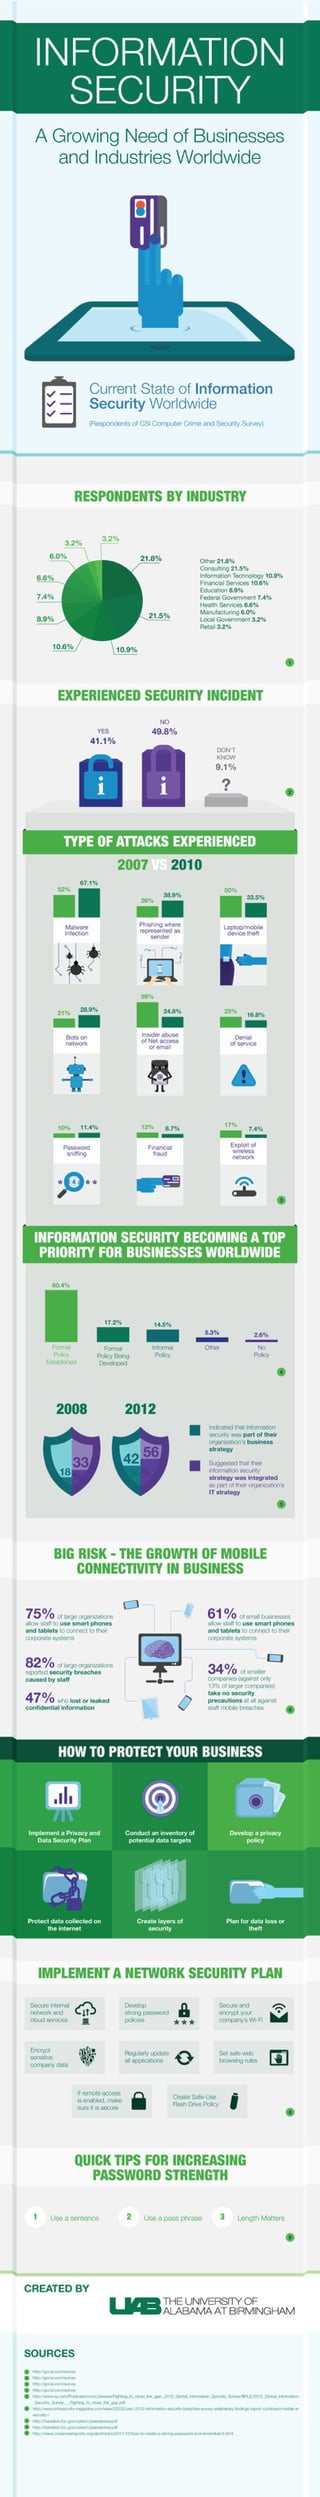 Are you safe online? Information security